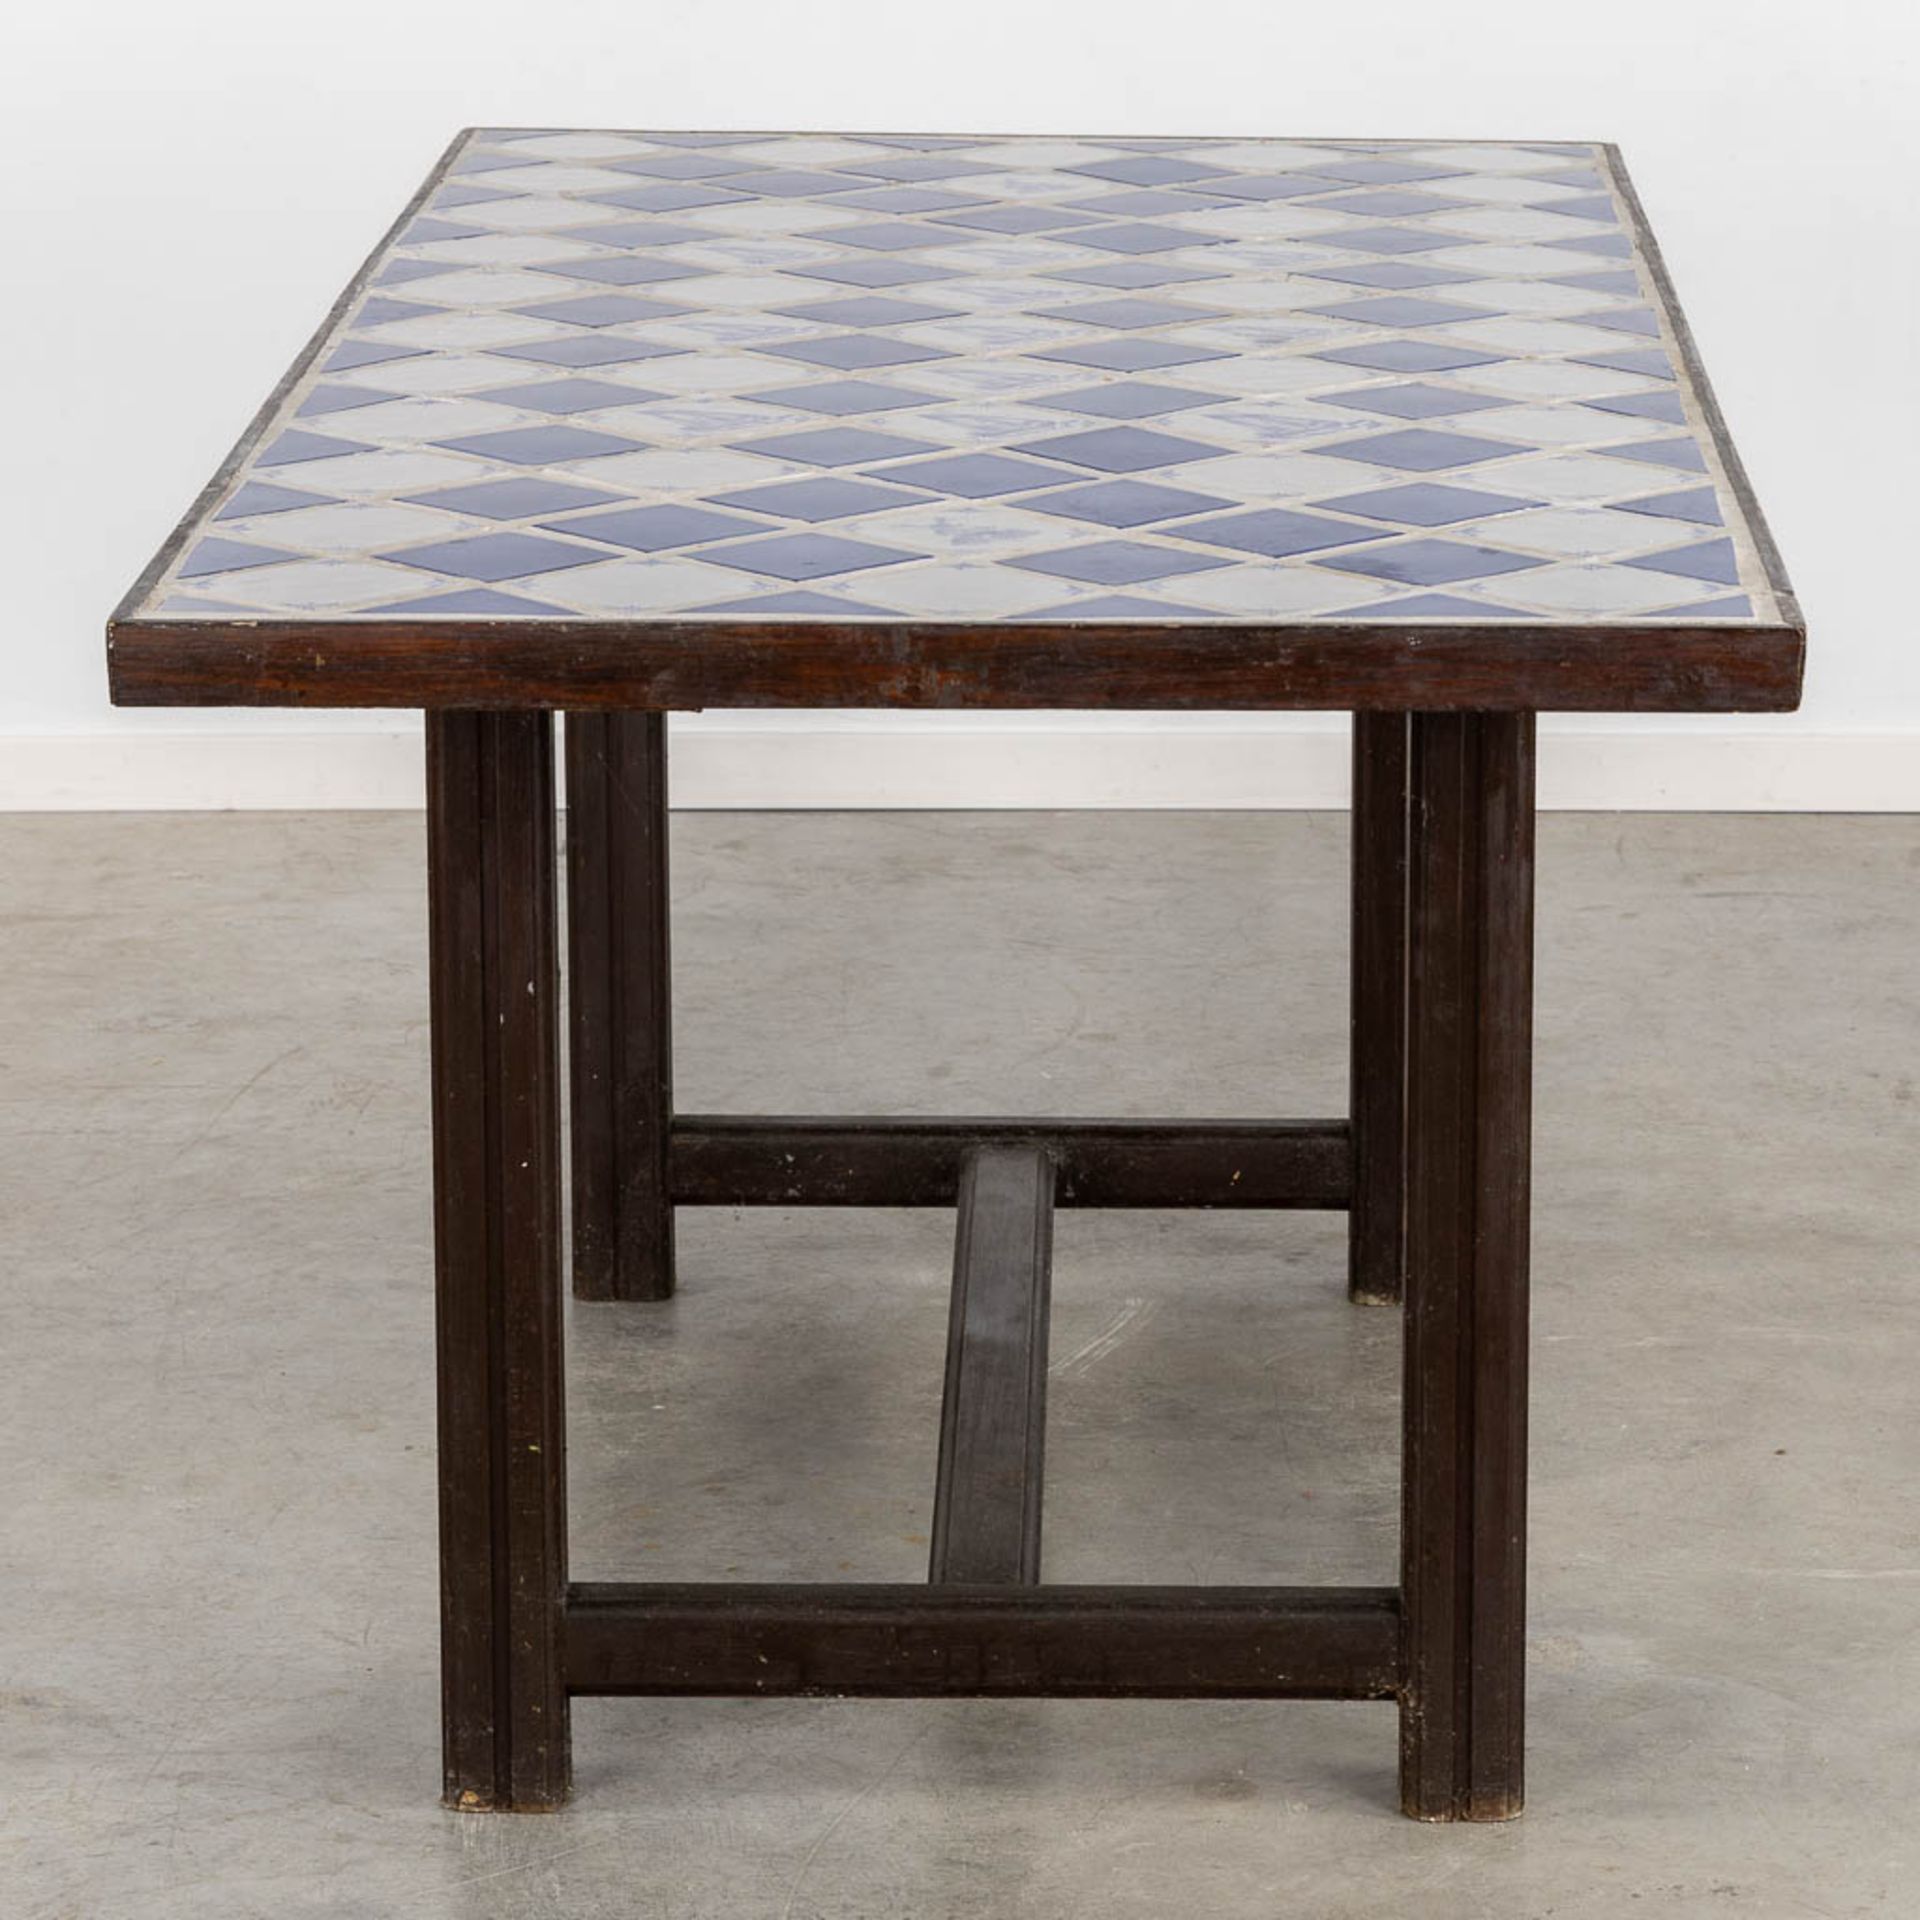 A Spanish table, finished with white and blue tiles. (L:85 x W:184 x H:76 cm) - Bild 6 aus 11